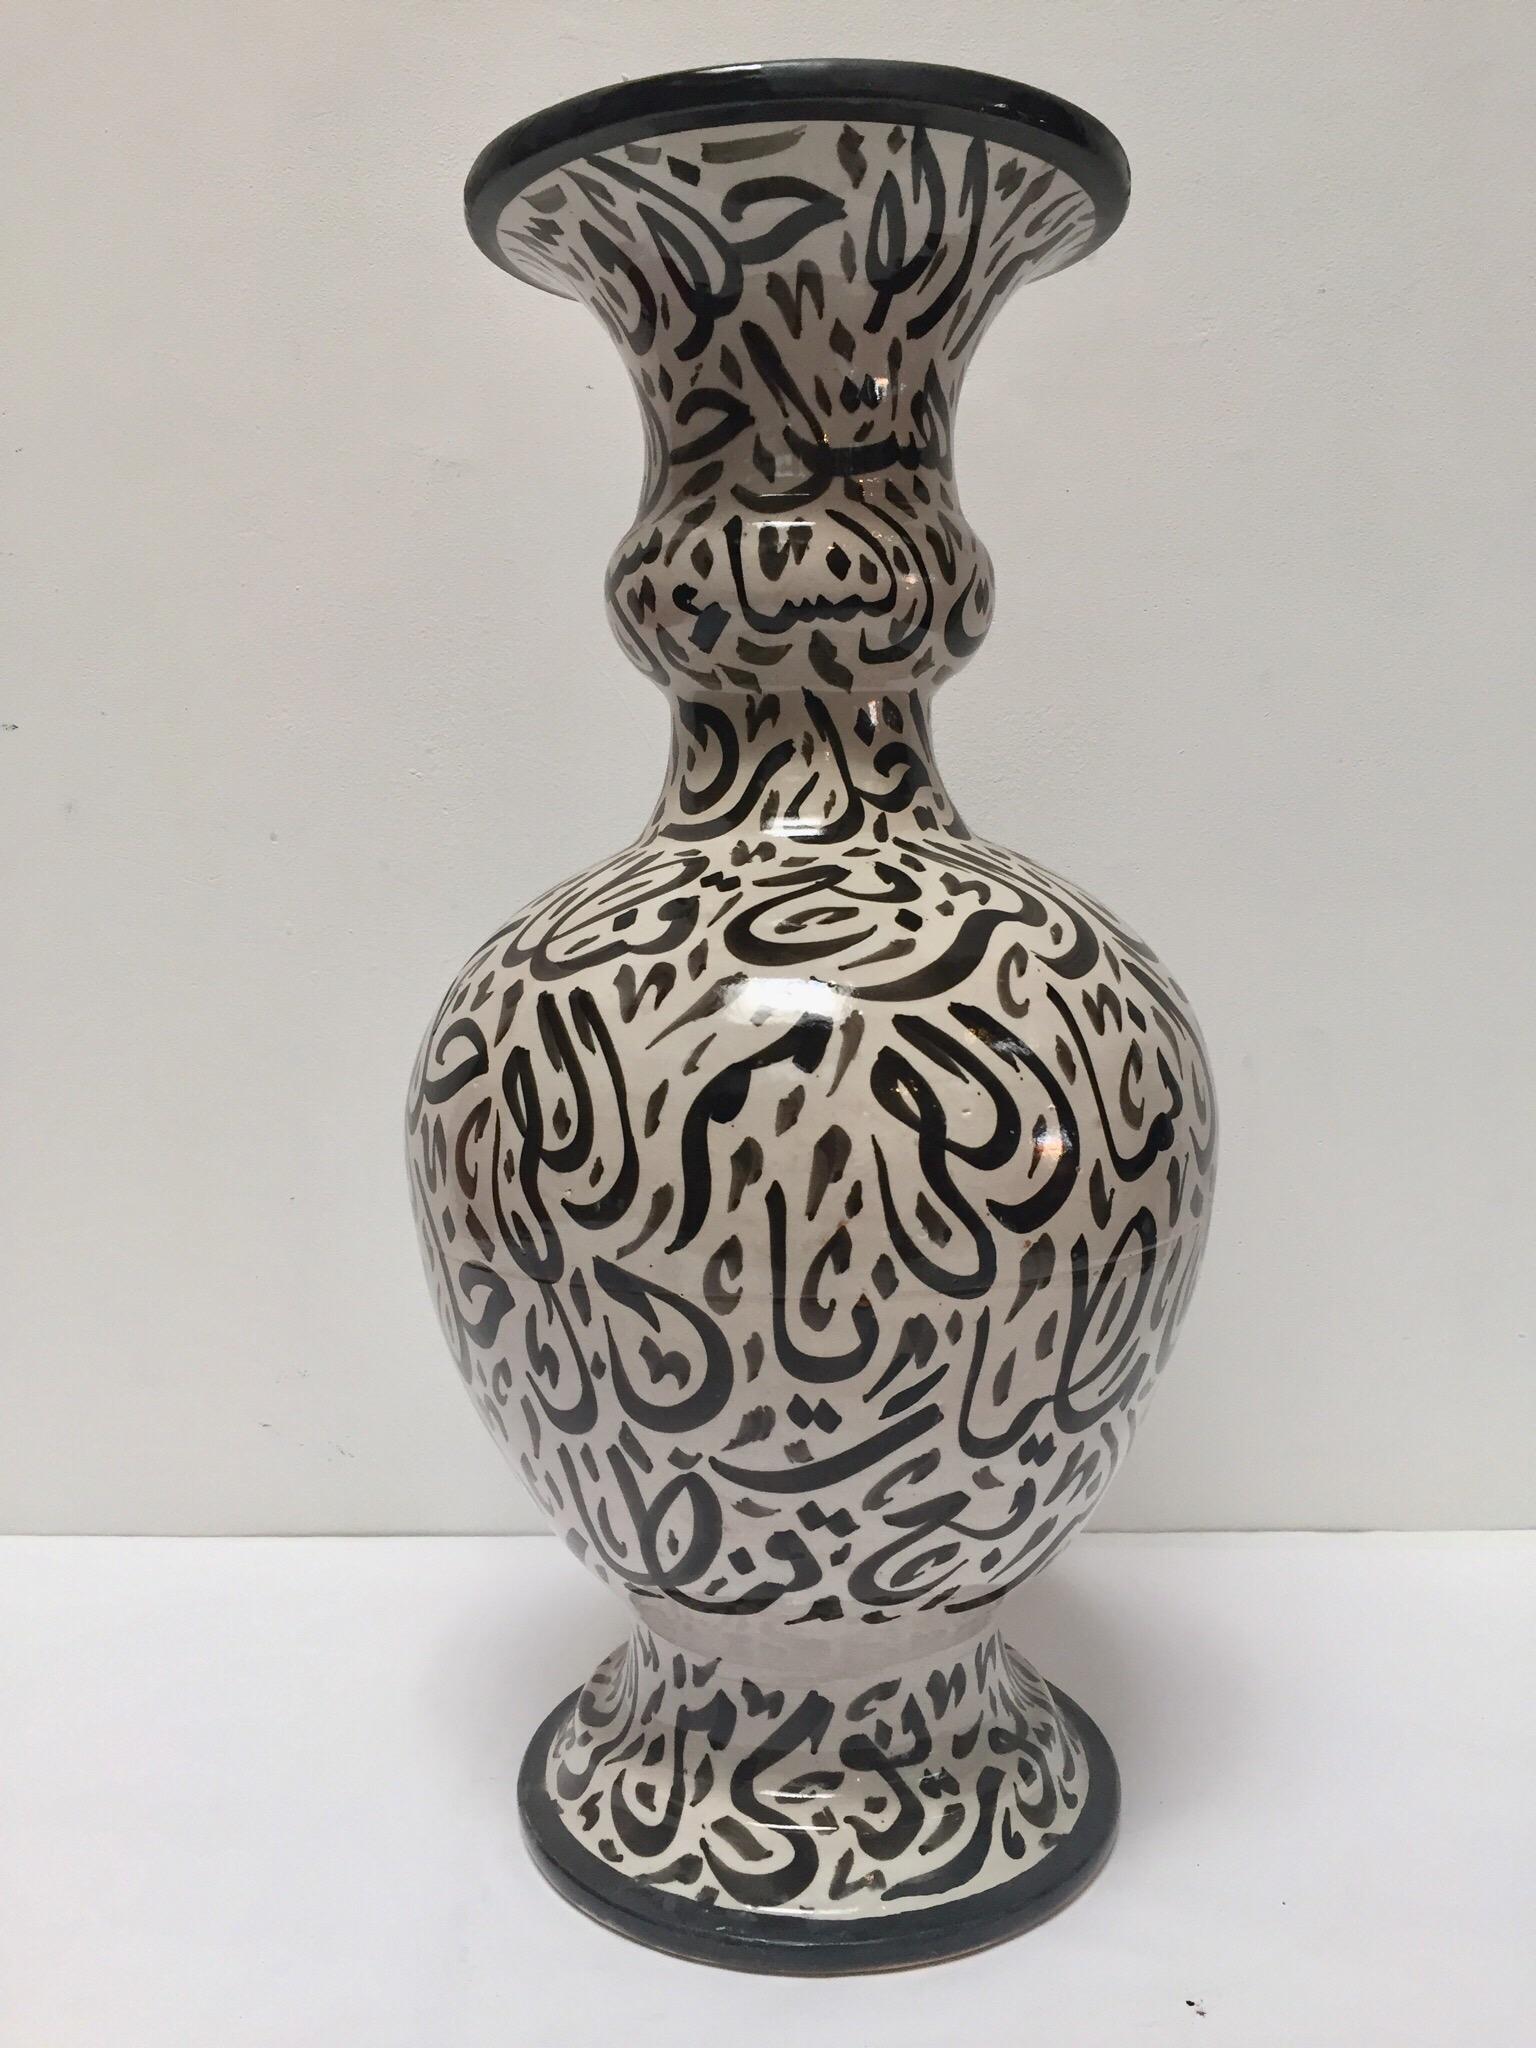 Islamic Large Moroccan Glazed Ceramic Vase with Arabic Calligraphy Brown Writing, Fez